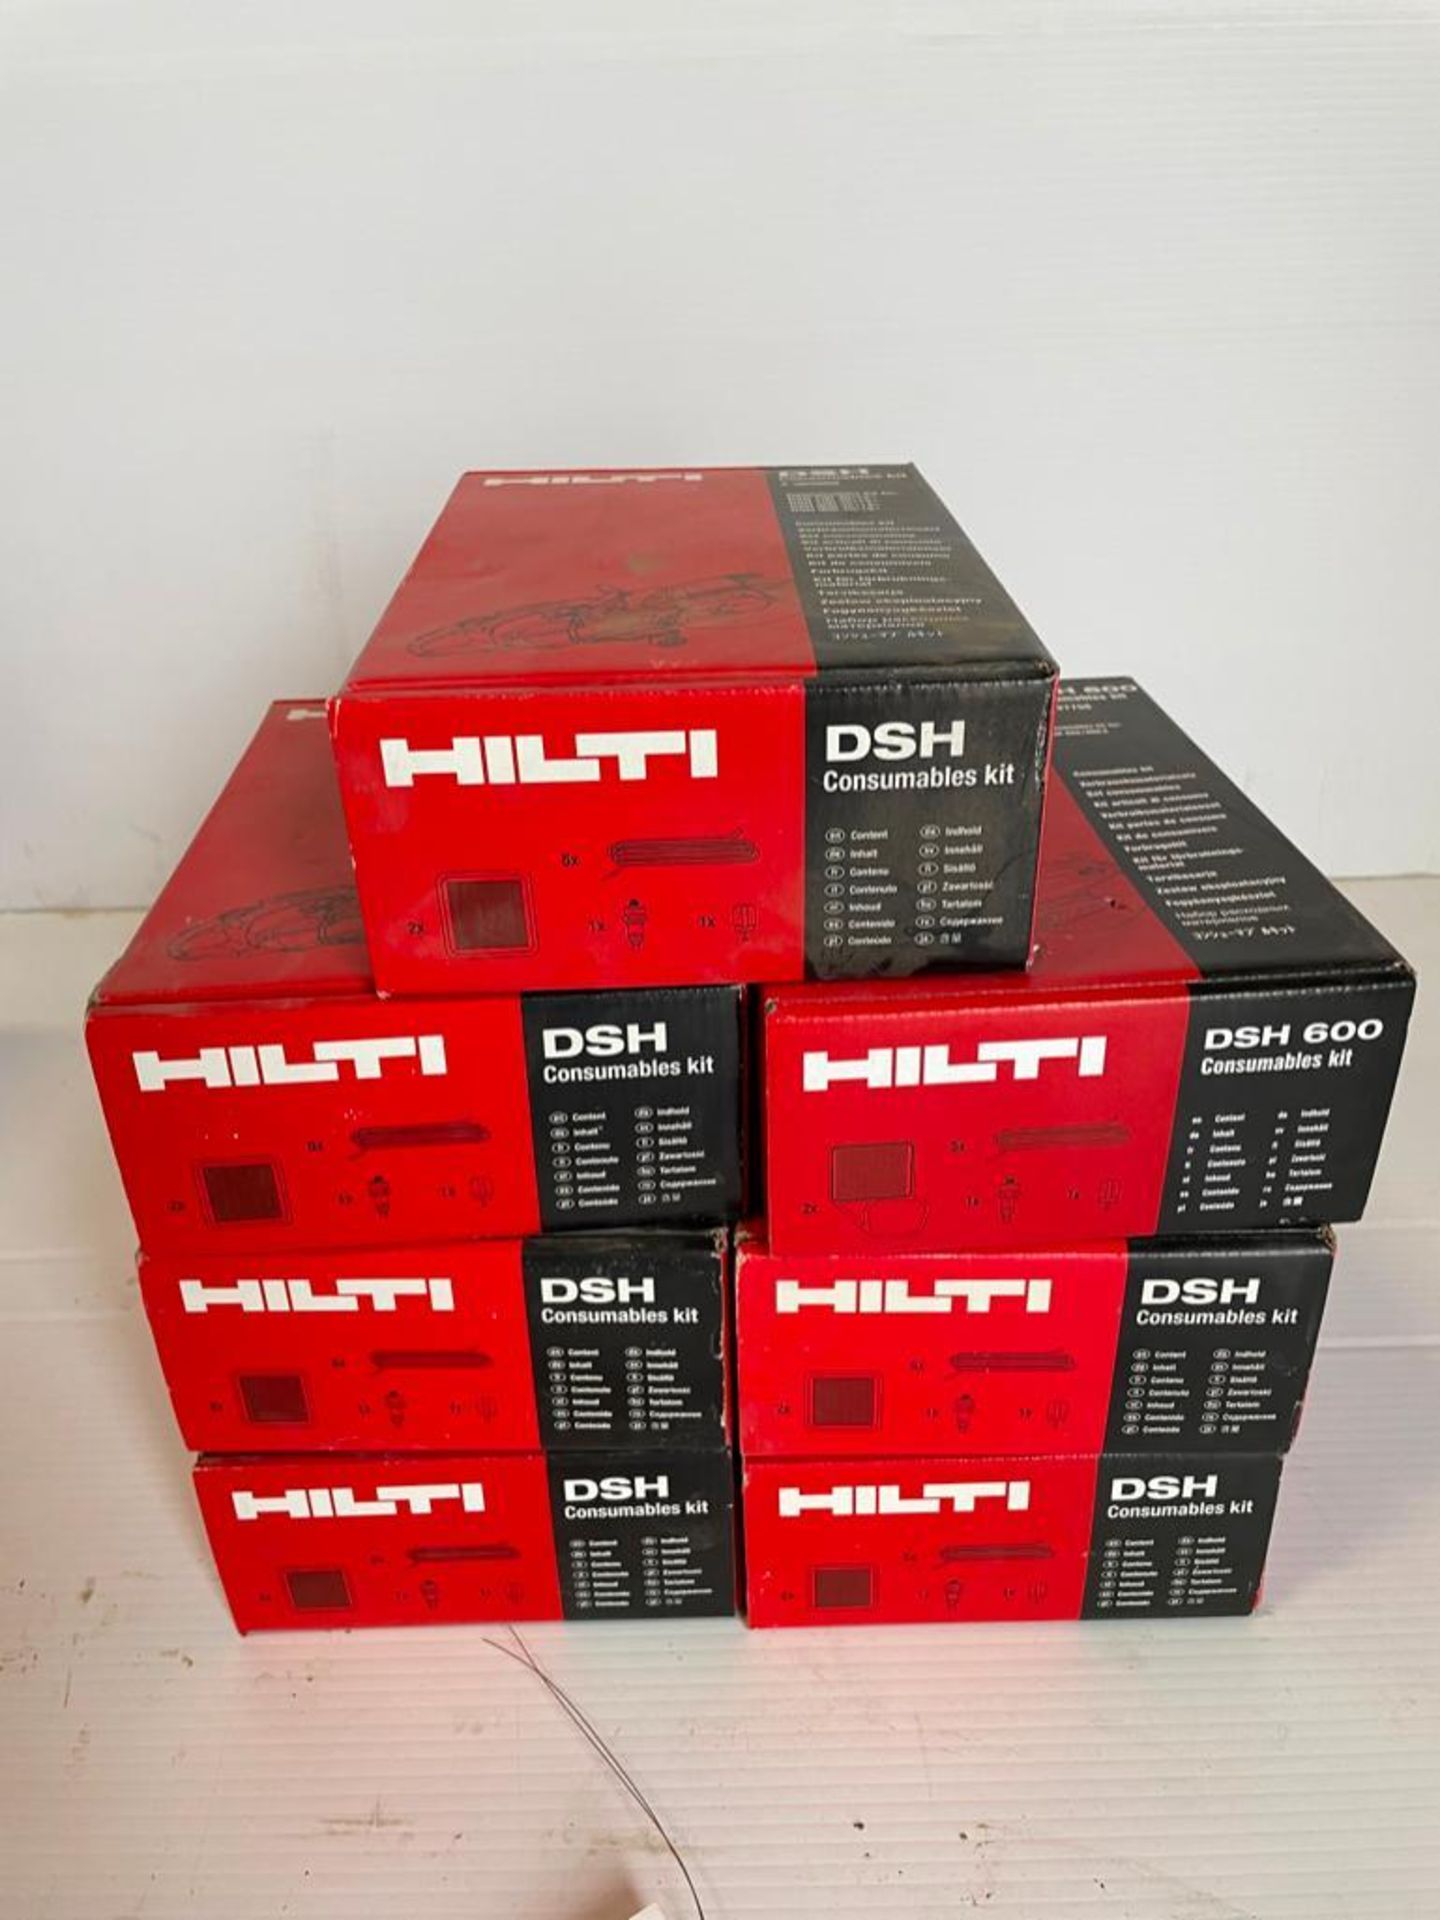 Hilti DSH Consumables Kit. Located in Hazelwood, MO - Image 2 of 5